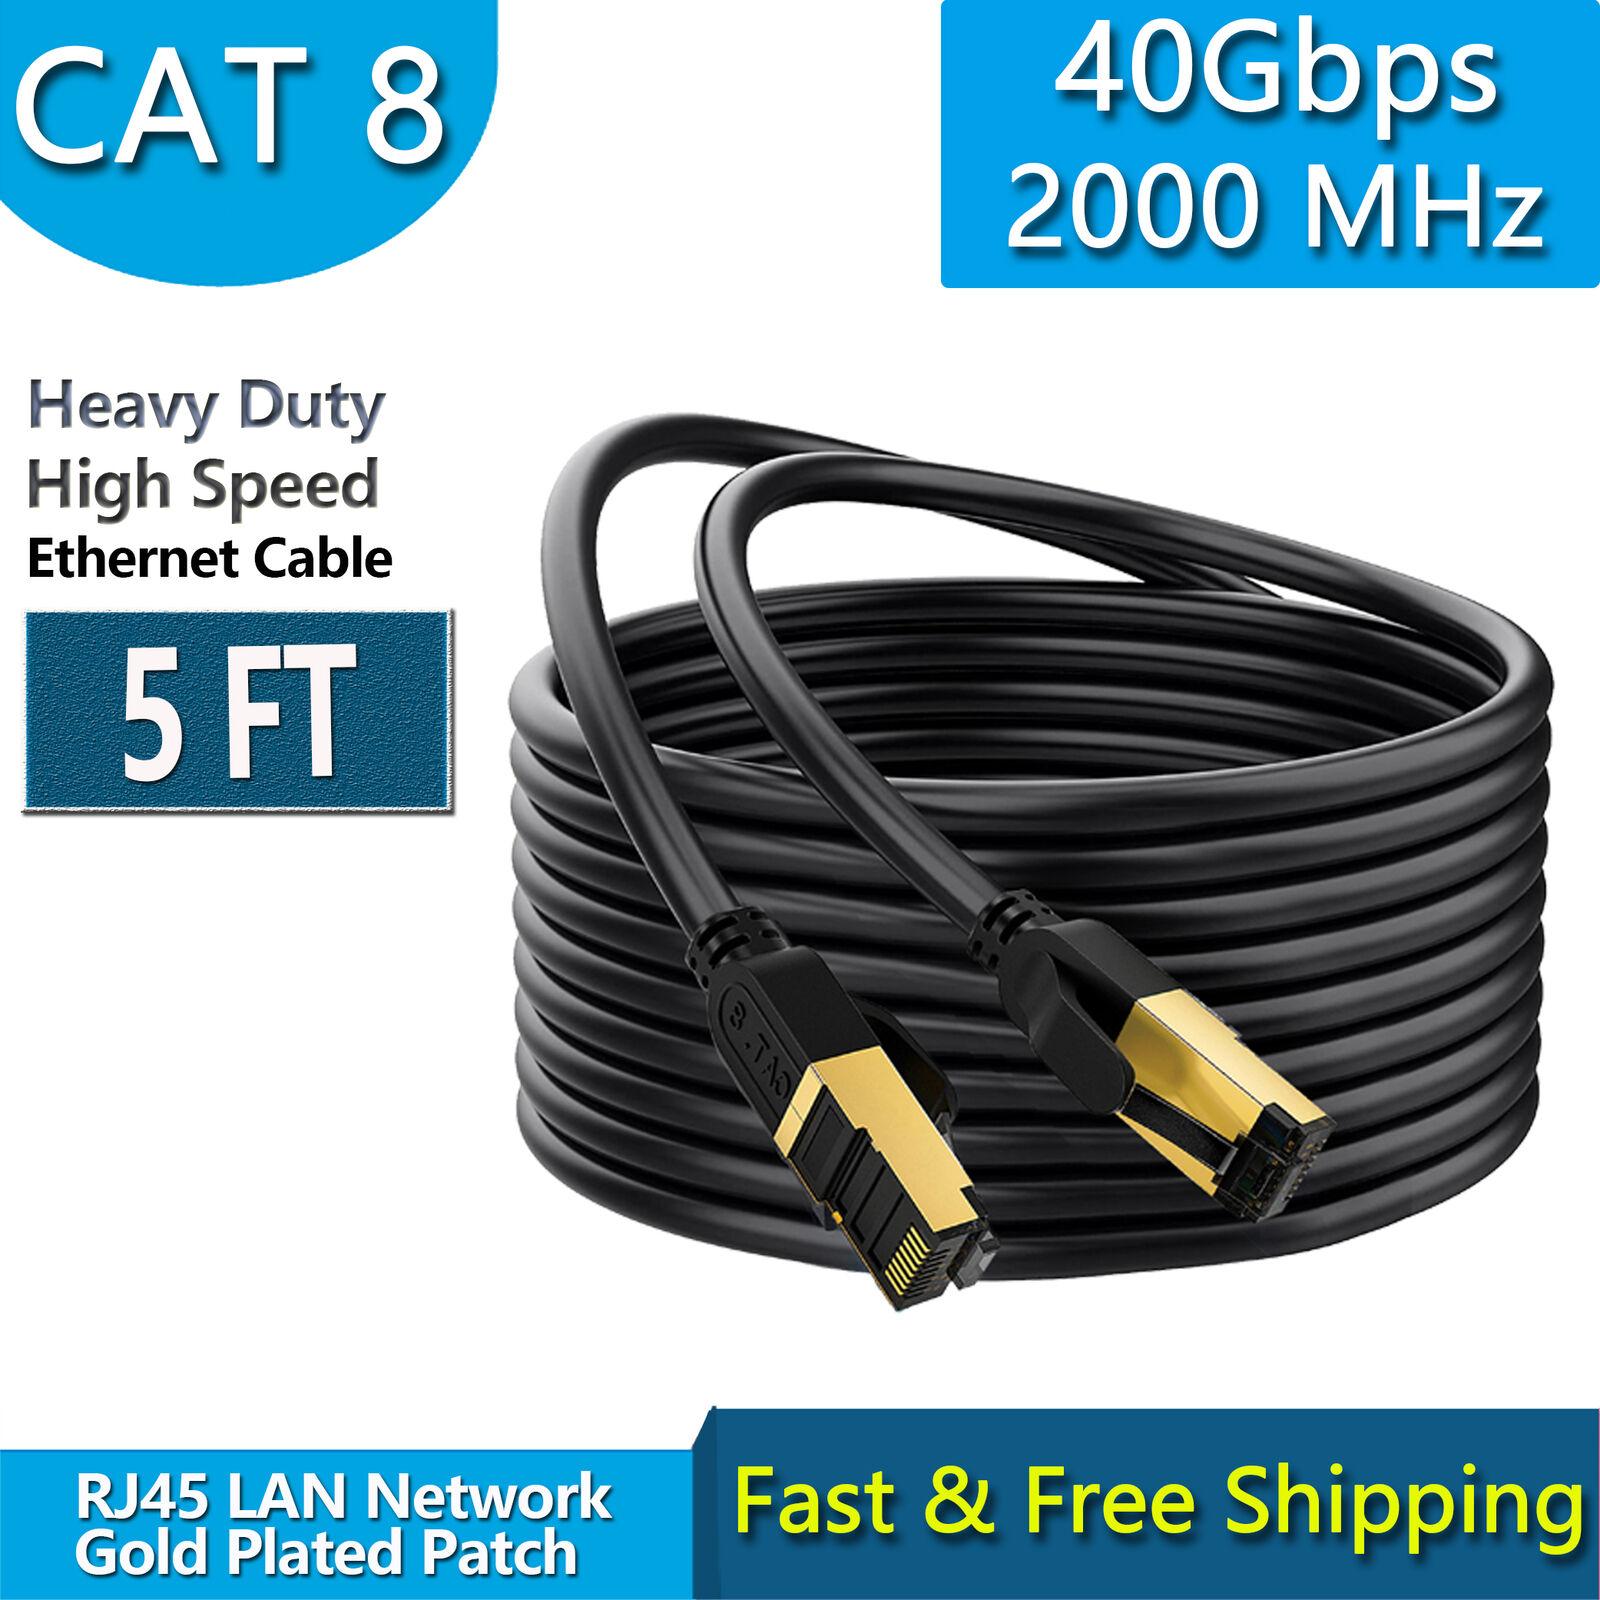 Cat 8 Ethernet RJ45 LAN Cable Super Speed 40Gbps Patch Network Gold Plated lot